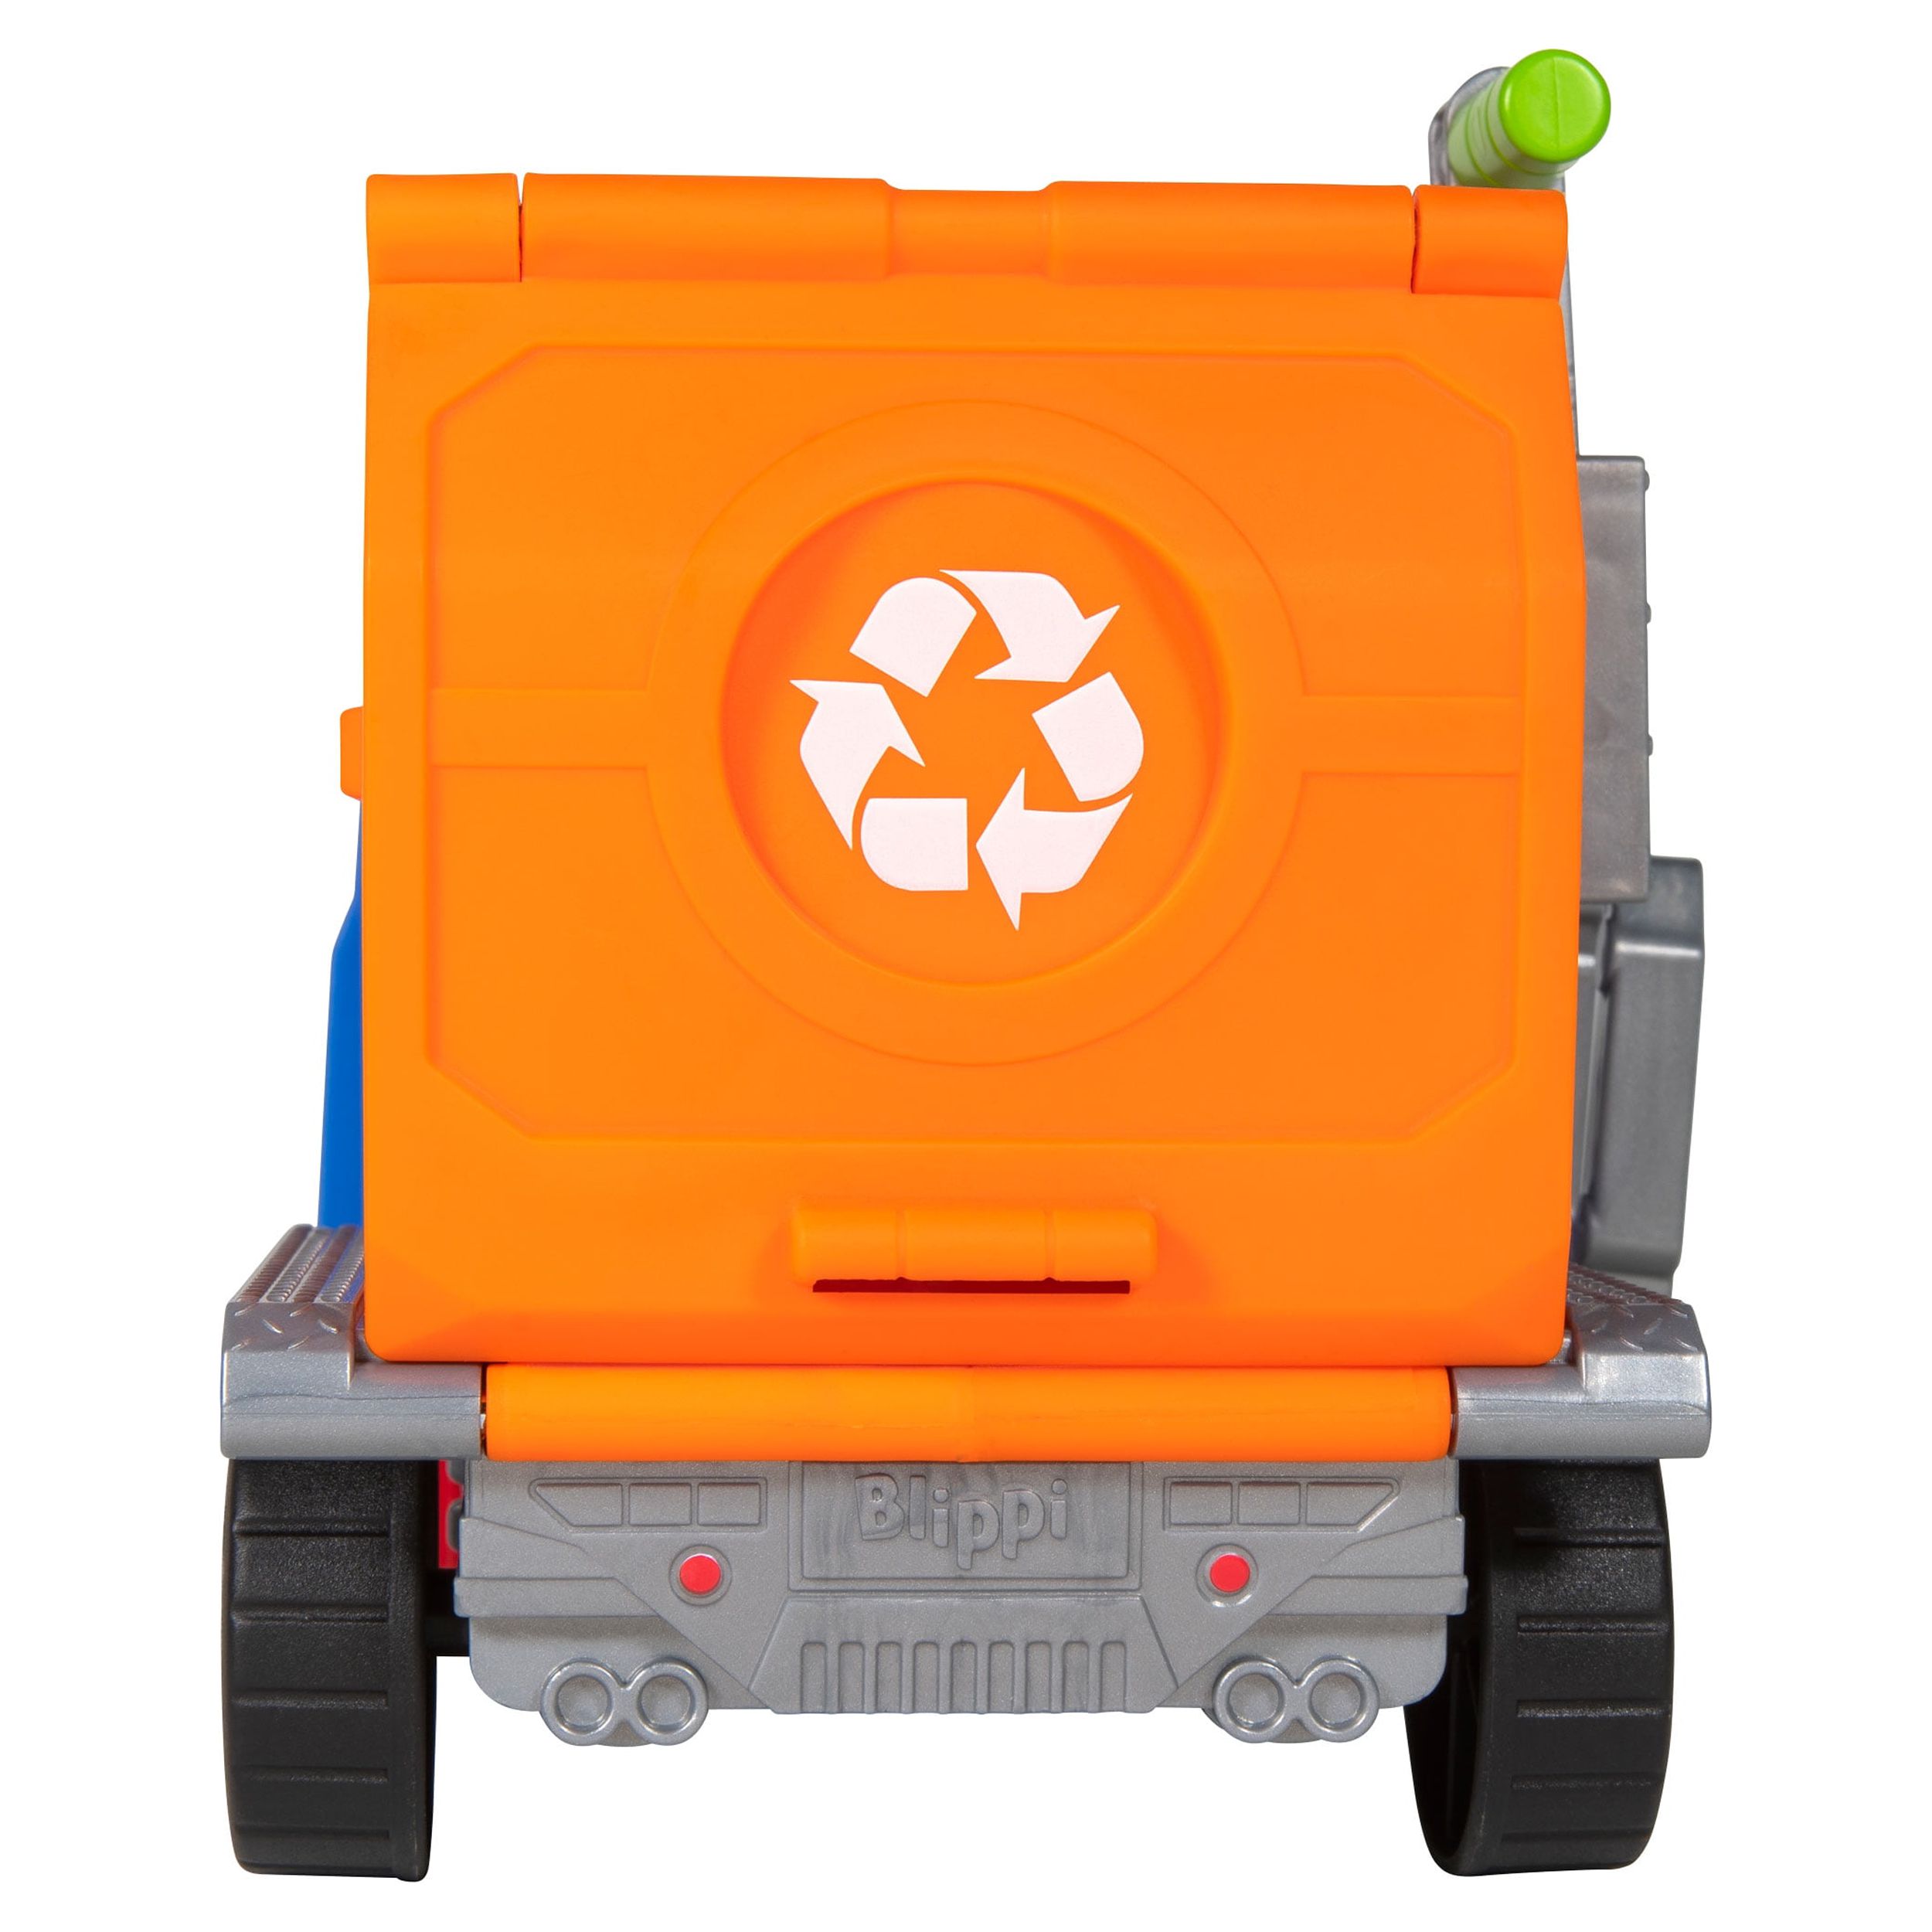 BLIPPI Recycling Truck Play Vehicle - image 15 of 18